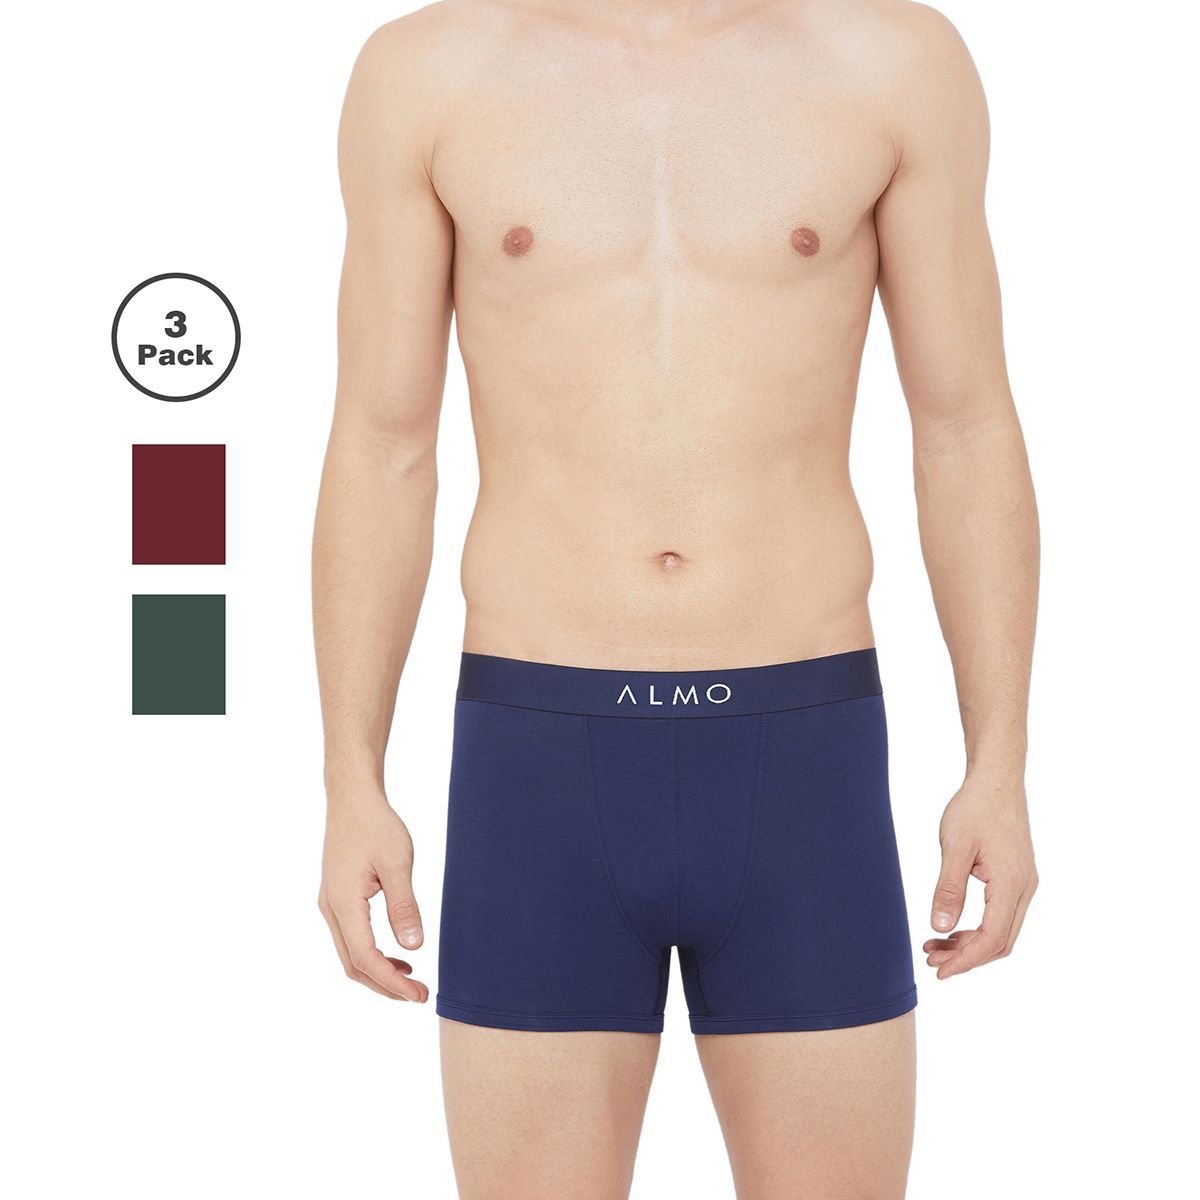 ALMO Rico Solid Organic Cotton Trunk (Pack Of 3) - Multi-Color (XXL)